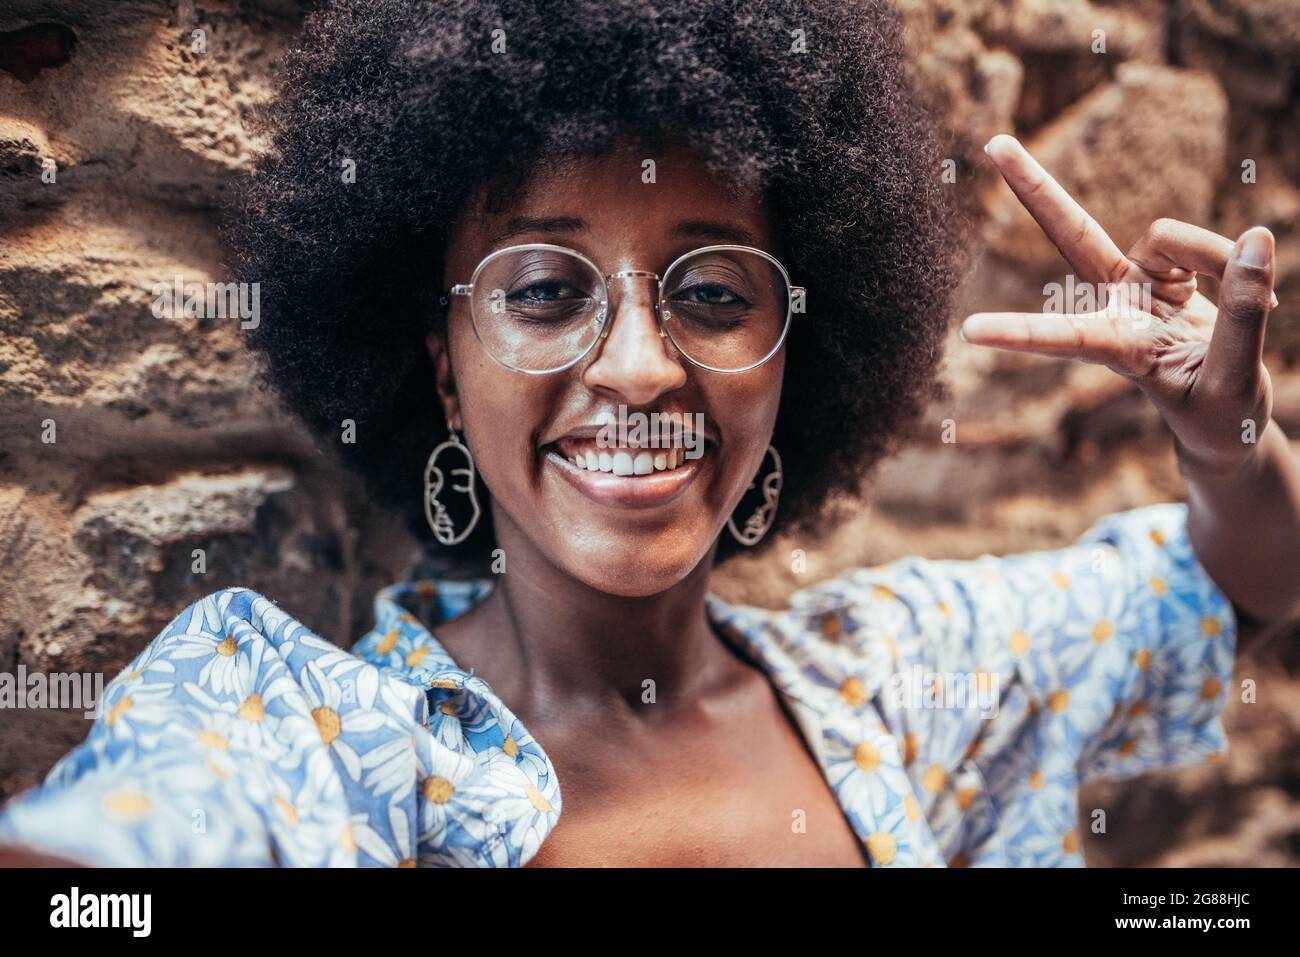 self picture of a cheerfil african woman. She is smiling and is doing victory symbol with her fingers. Concept of happiness and positivity Stock Photo